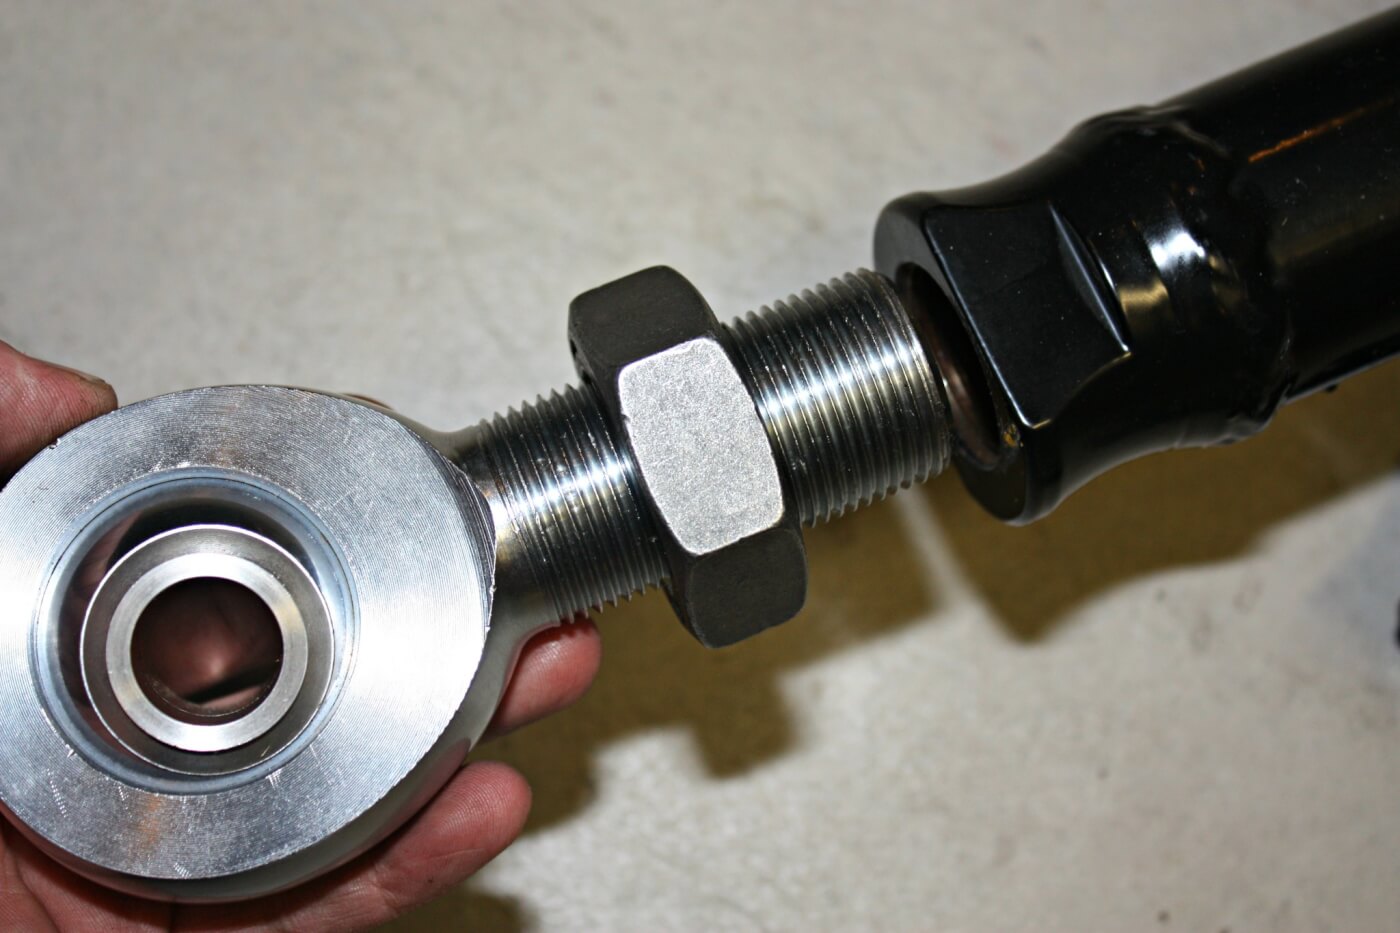 8. After determining which rod end needed to be threaded into each end of the bars, the jam nuts can be spun clear to the rod end, and then the rod end can be inserted into the bars, leaving about a quarter inch of threads sticking out. Remember to allow room for future length adjustment once its installed on the truck.